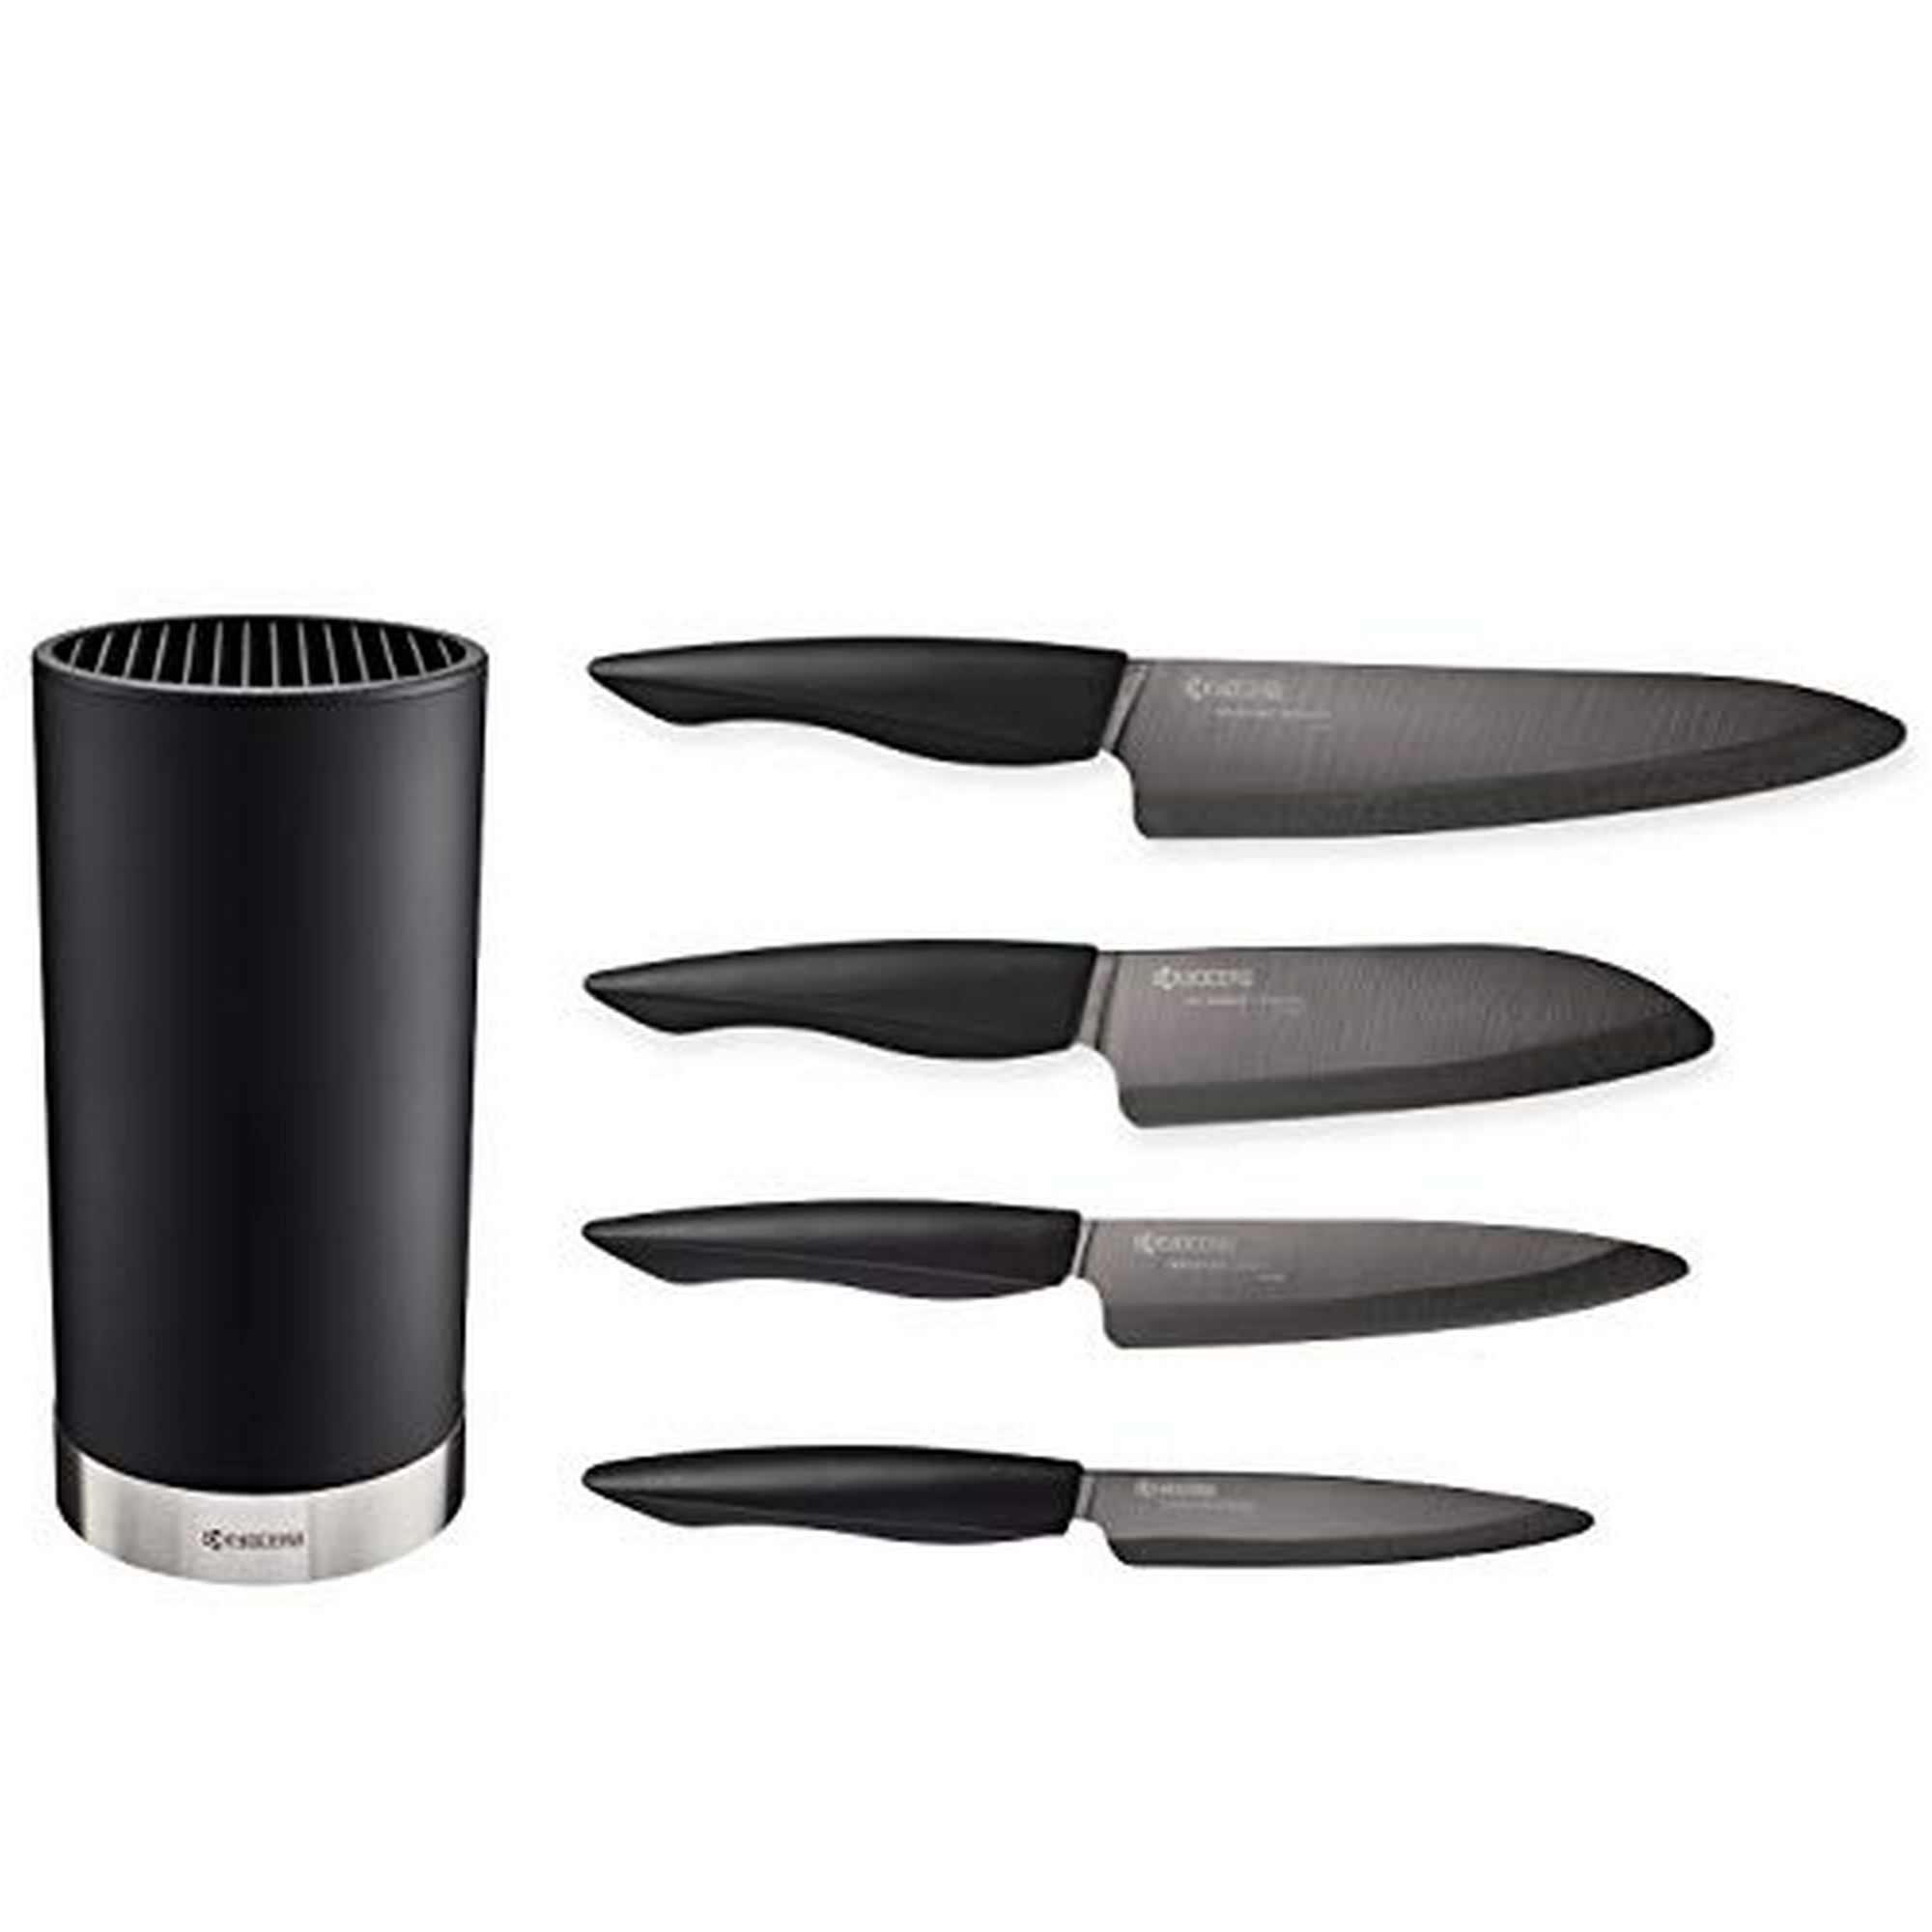 bridge index Calm Kyocera Universal Knife Block Set Includes: Black Soft Touch Round and 4  Innovation Series Ceramic Knives | Walmart Canada